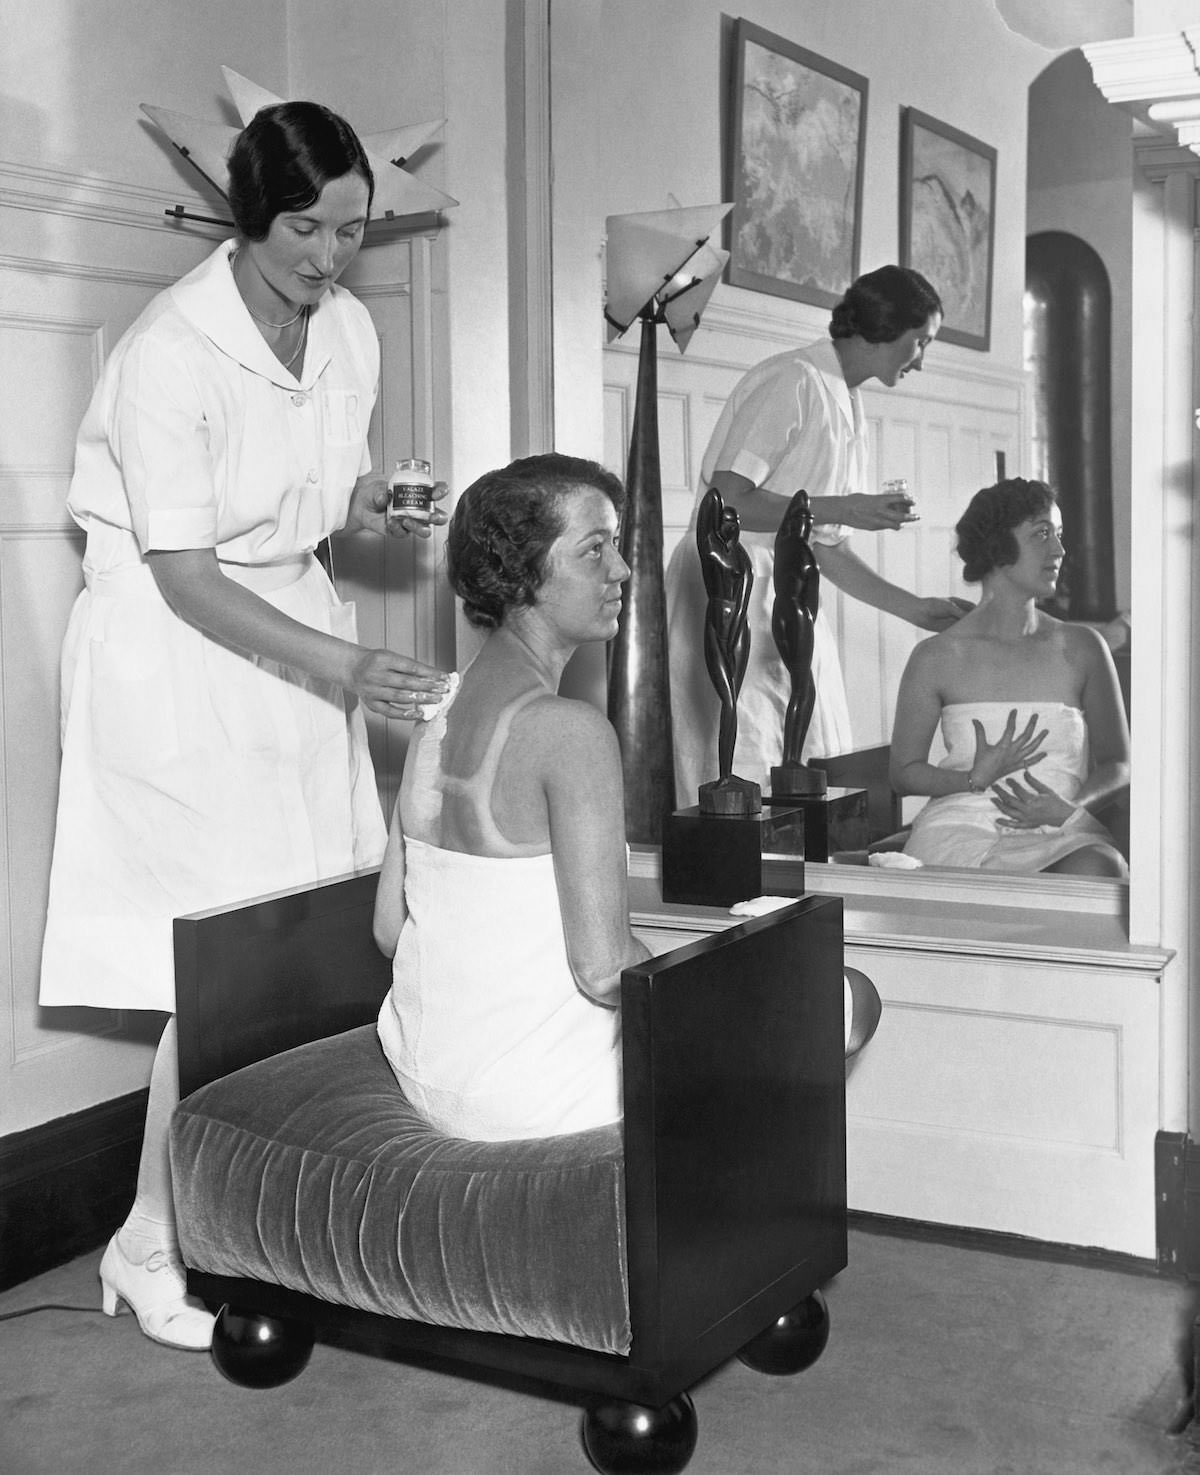 Carolyn Lang applies lotions to Billie Gloss' suntanned back, bleaching it down so that Miss Gloss will be the same pale shade all over.